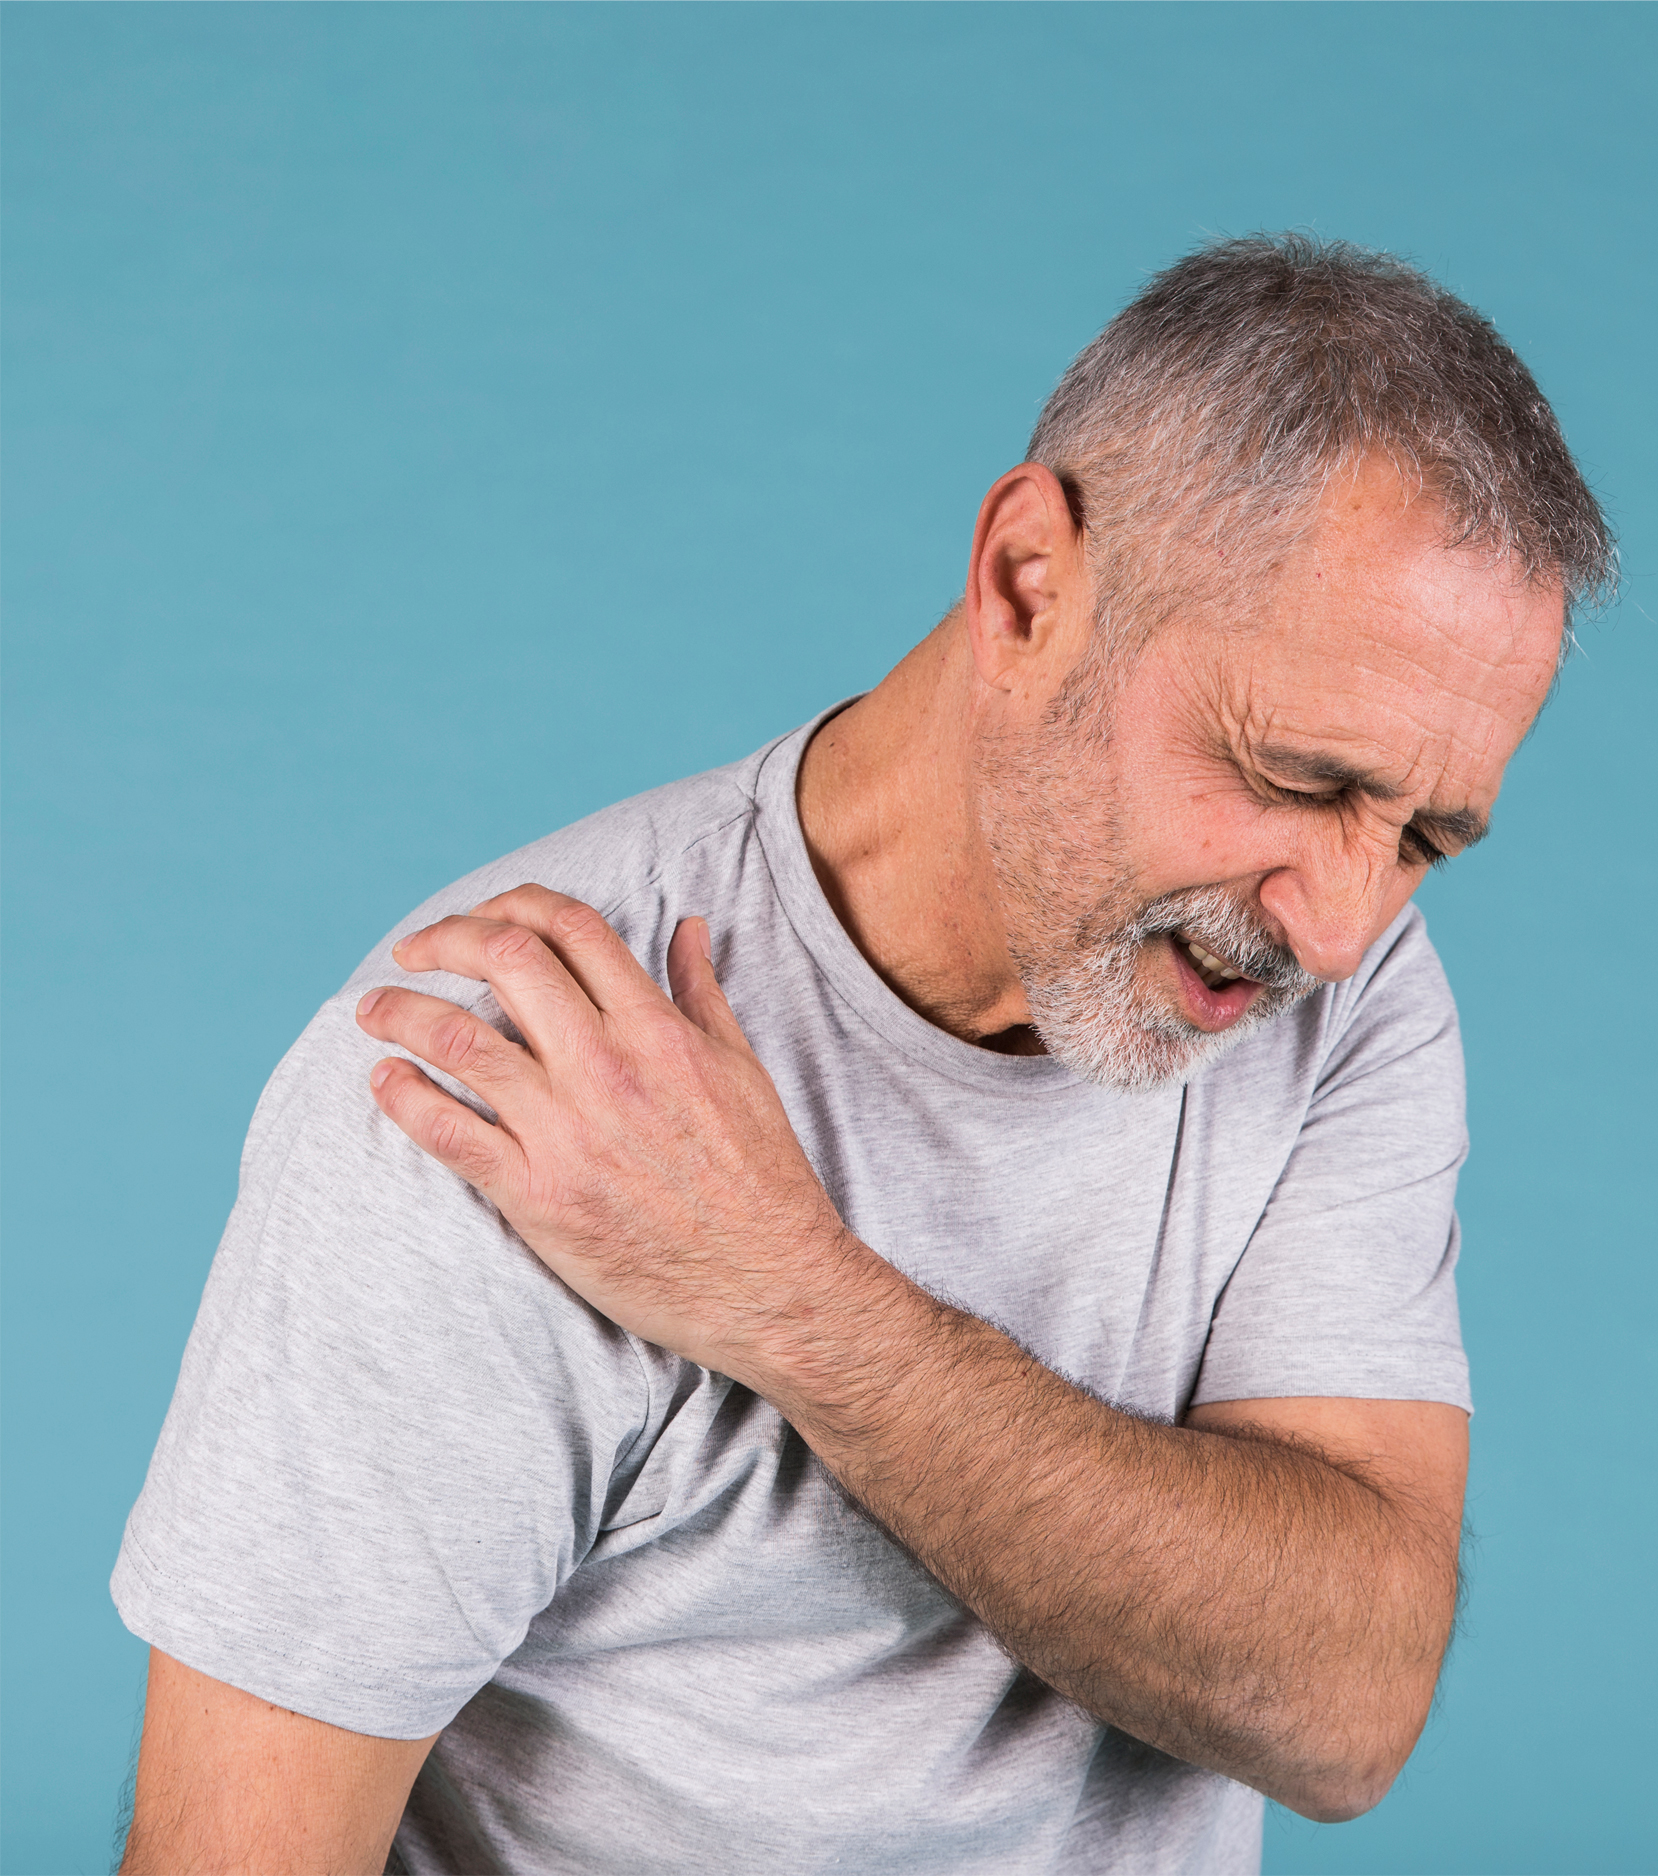 Shoulder Pain And Relief By Physiotherapy